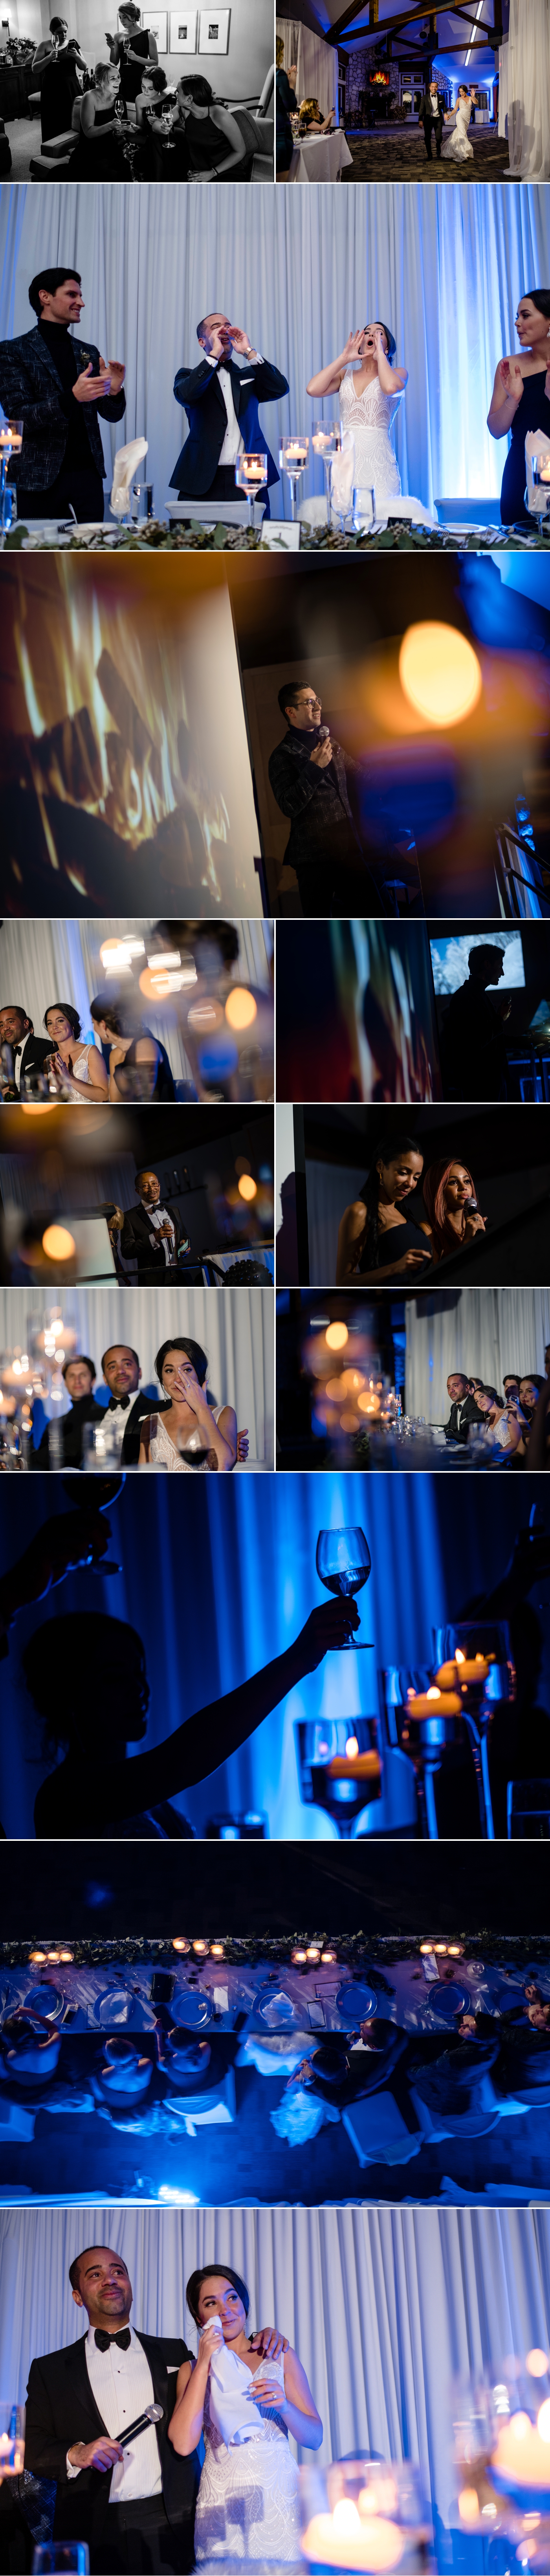 candid moments during a winter wedding reception at the grand manitou in mont tremblant quebec